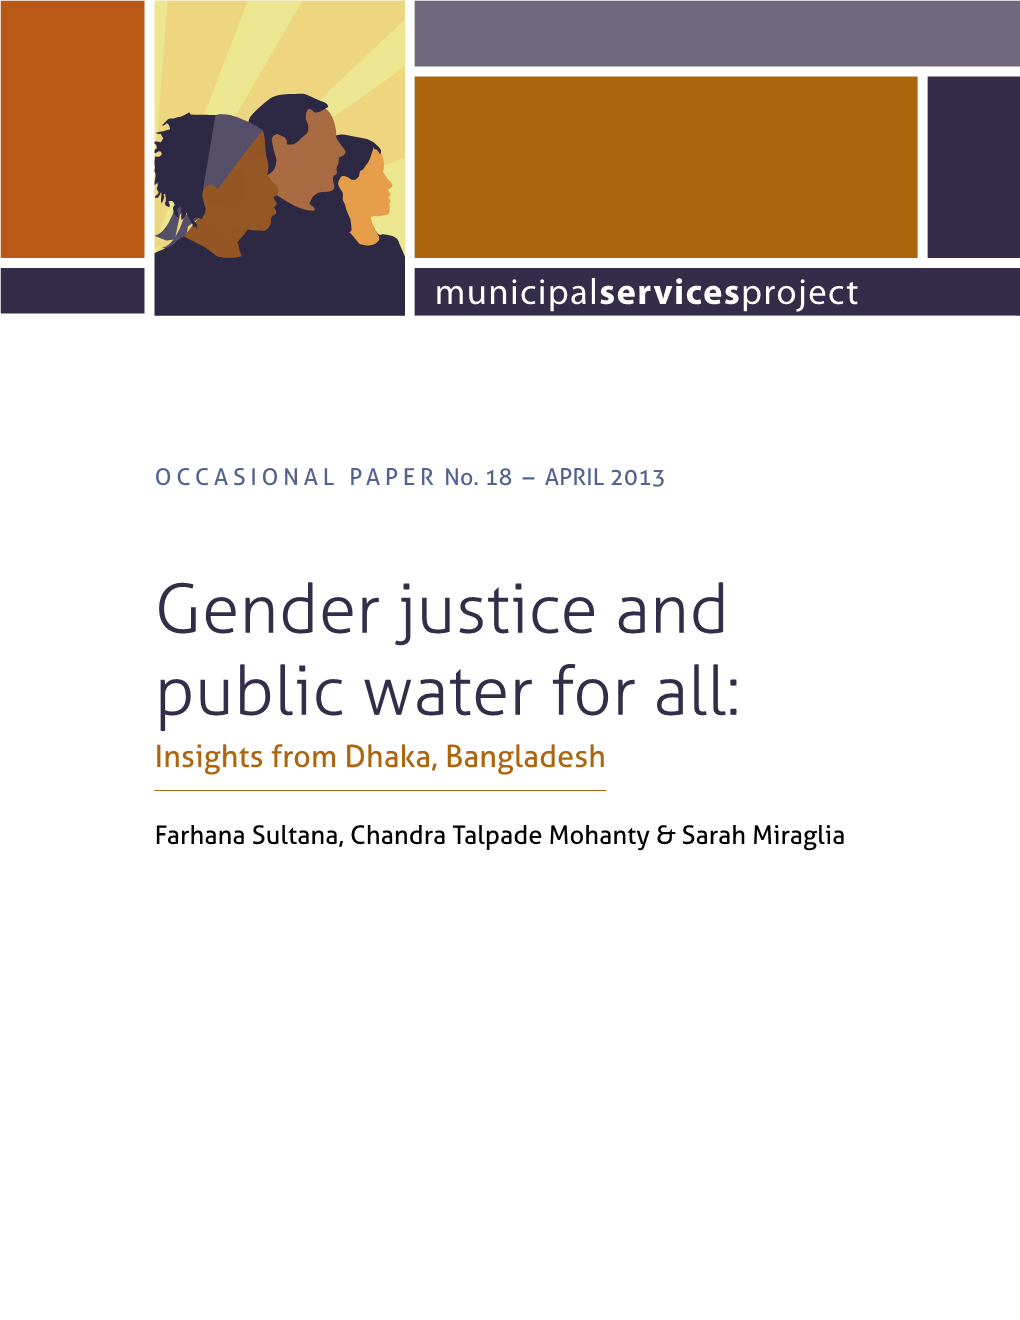 Gender Justice and Public Water for All: Insights from Dhaka, Bangladesh